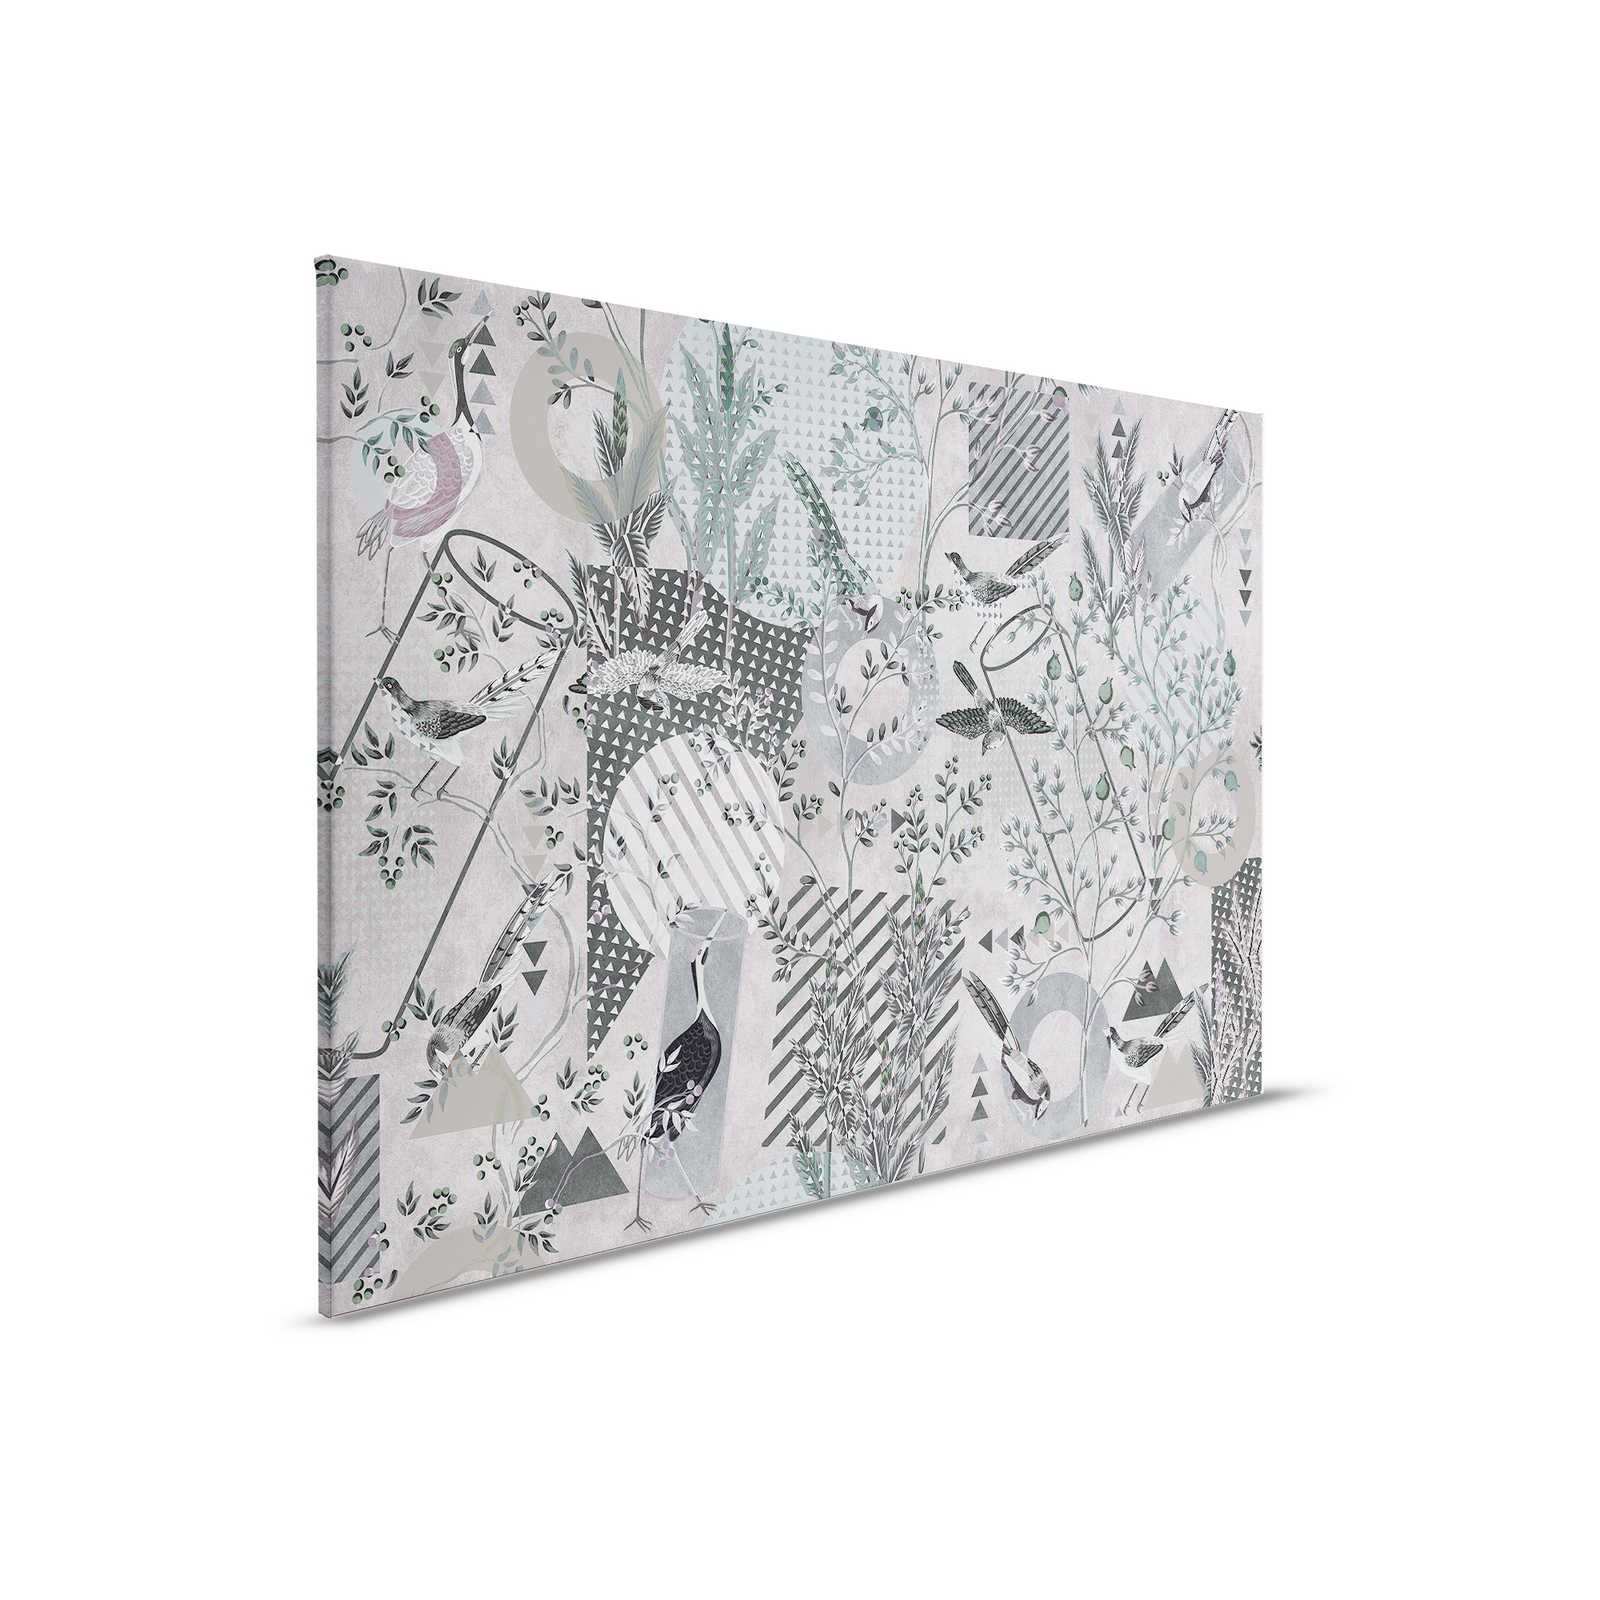         Birds Playgroude 1 - Canvas painting Grey Collage Birds & Patterns - 0,90 m x 0,60 m
    